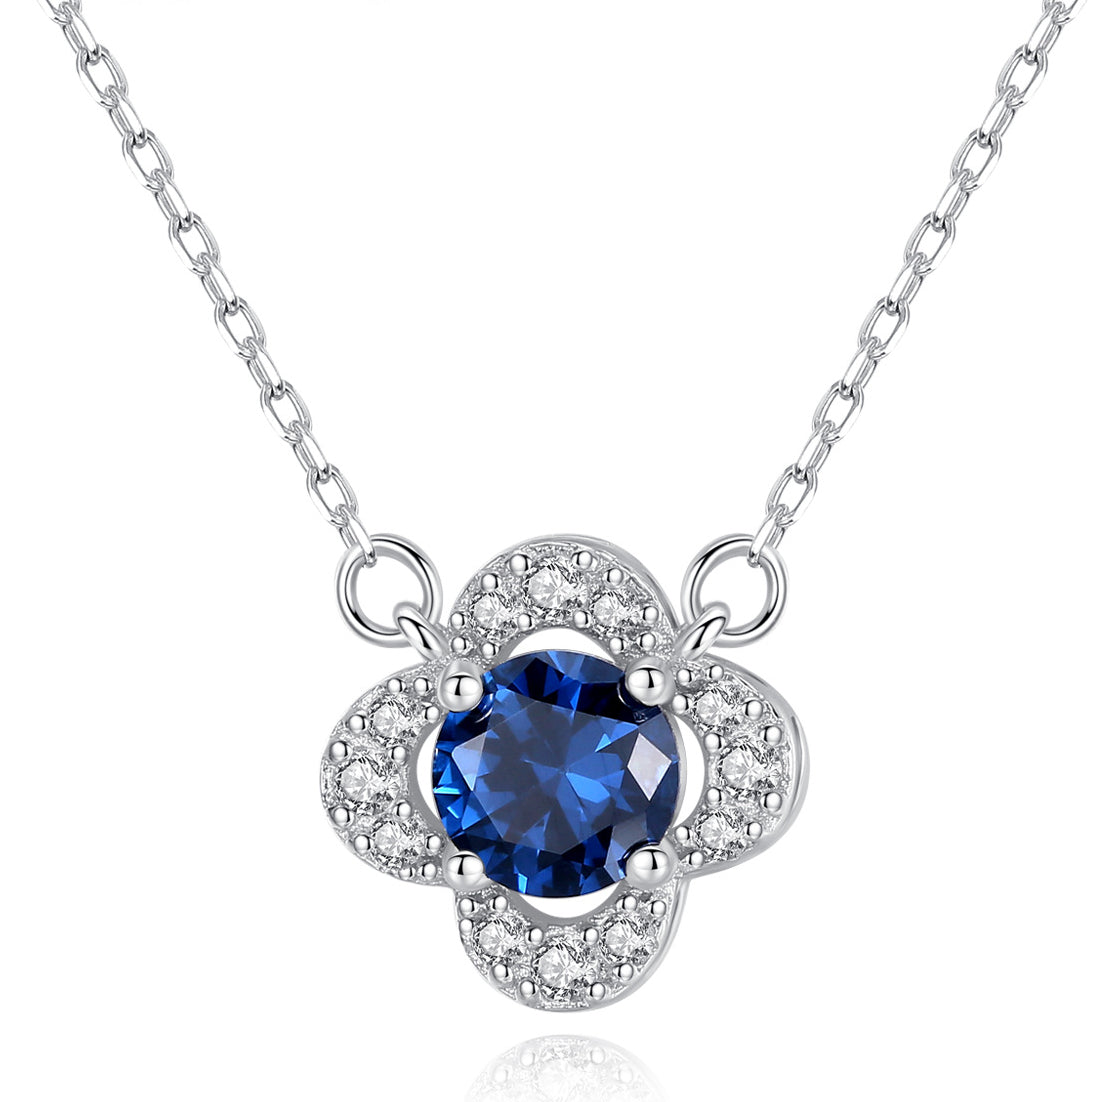 Gemstonely- S925 Silver Necklace with Created Sapphire Gemstone Pendant in Lucky Four-Leaf Clover Design for Women